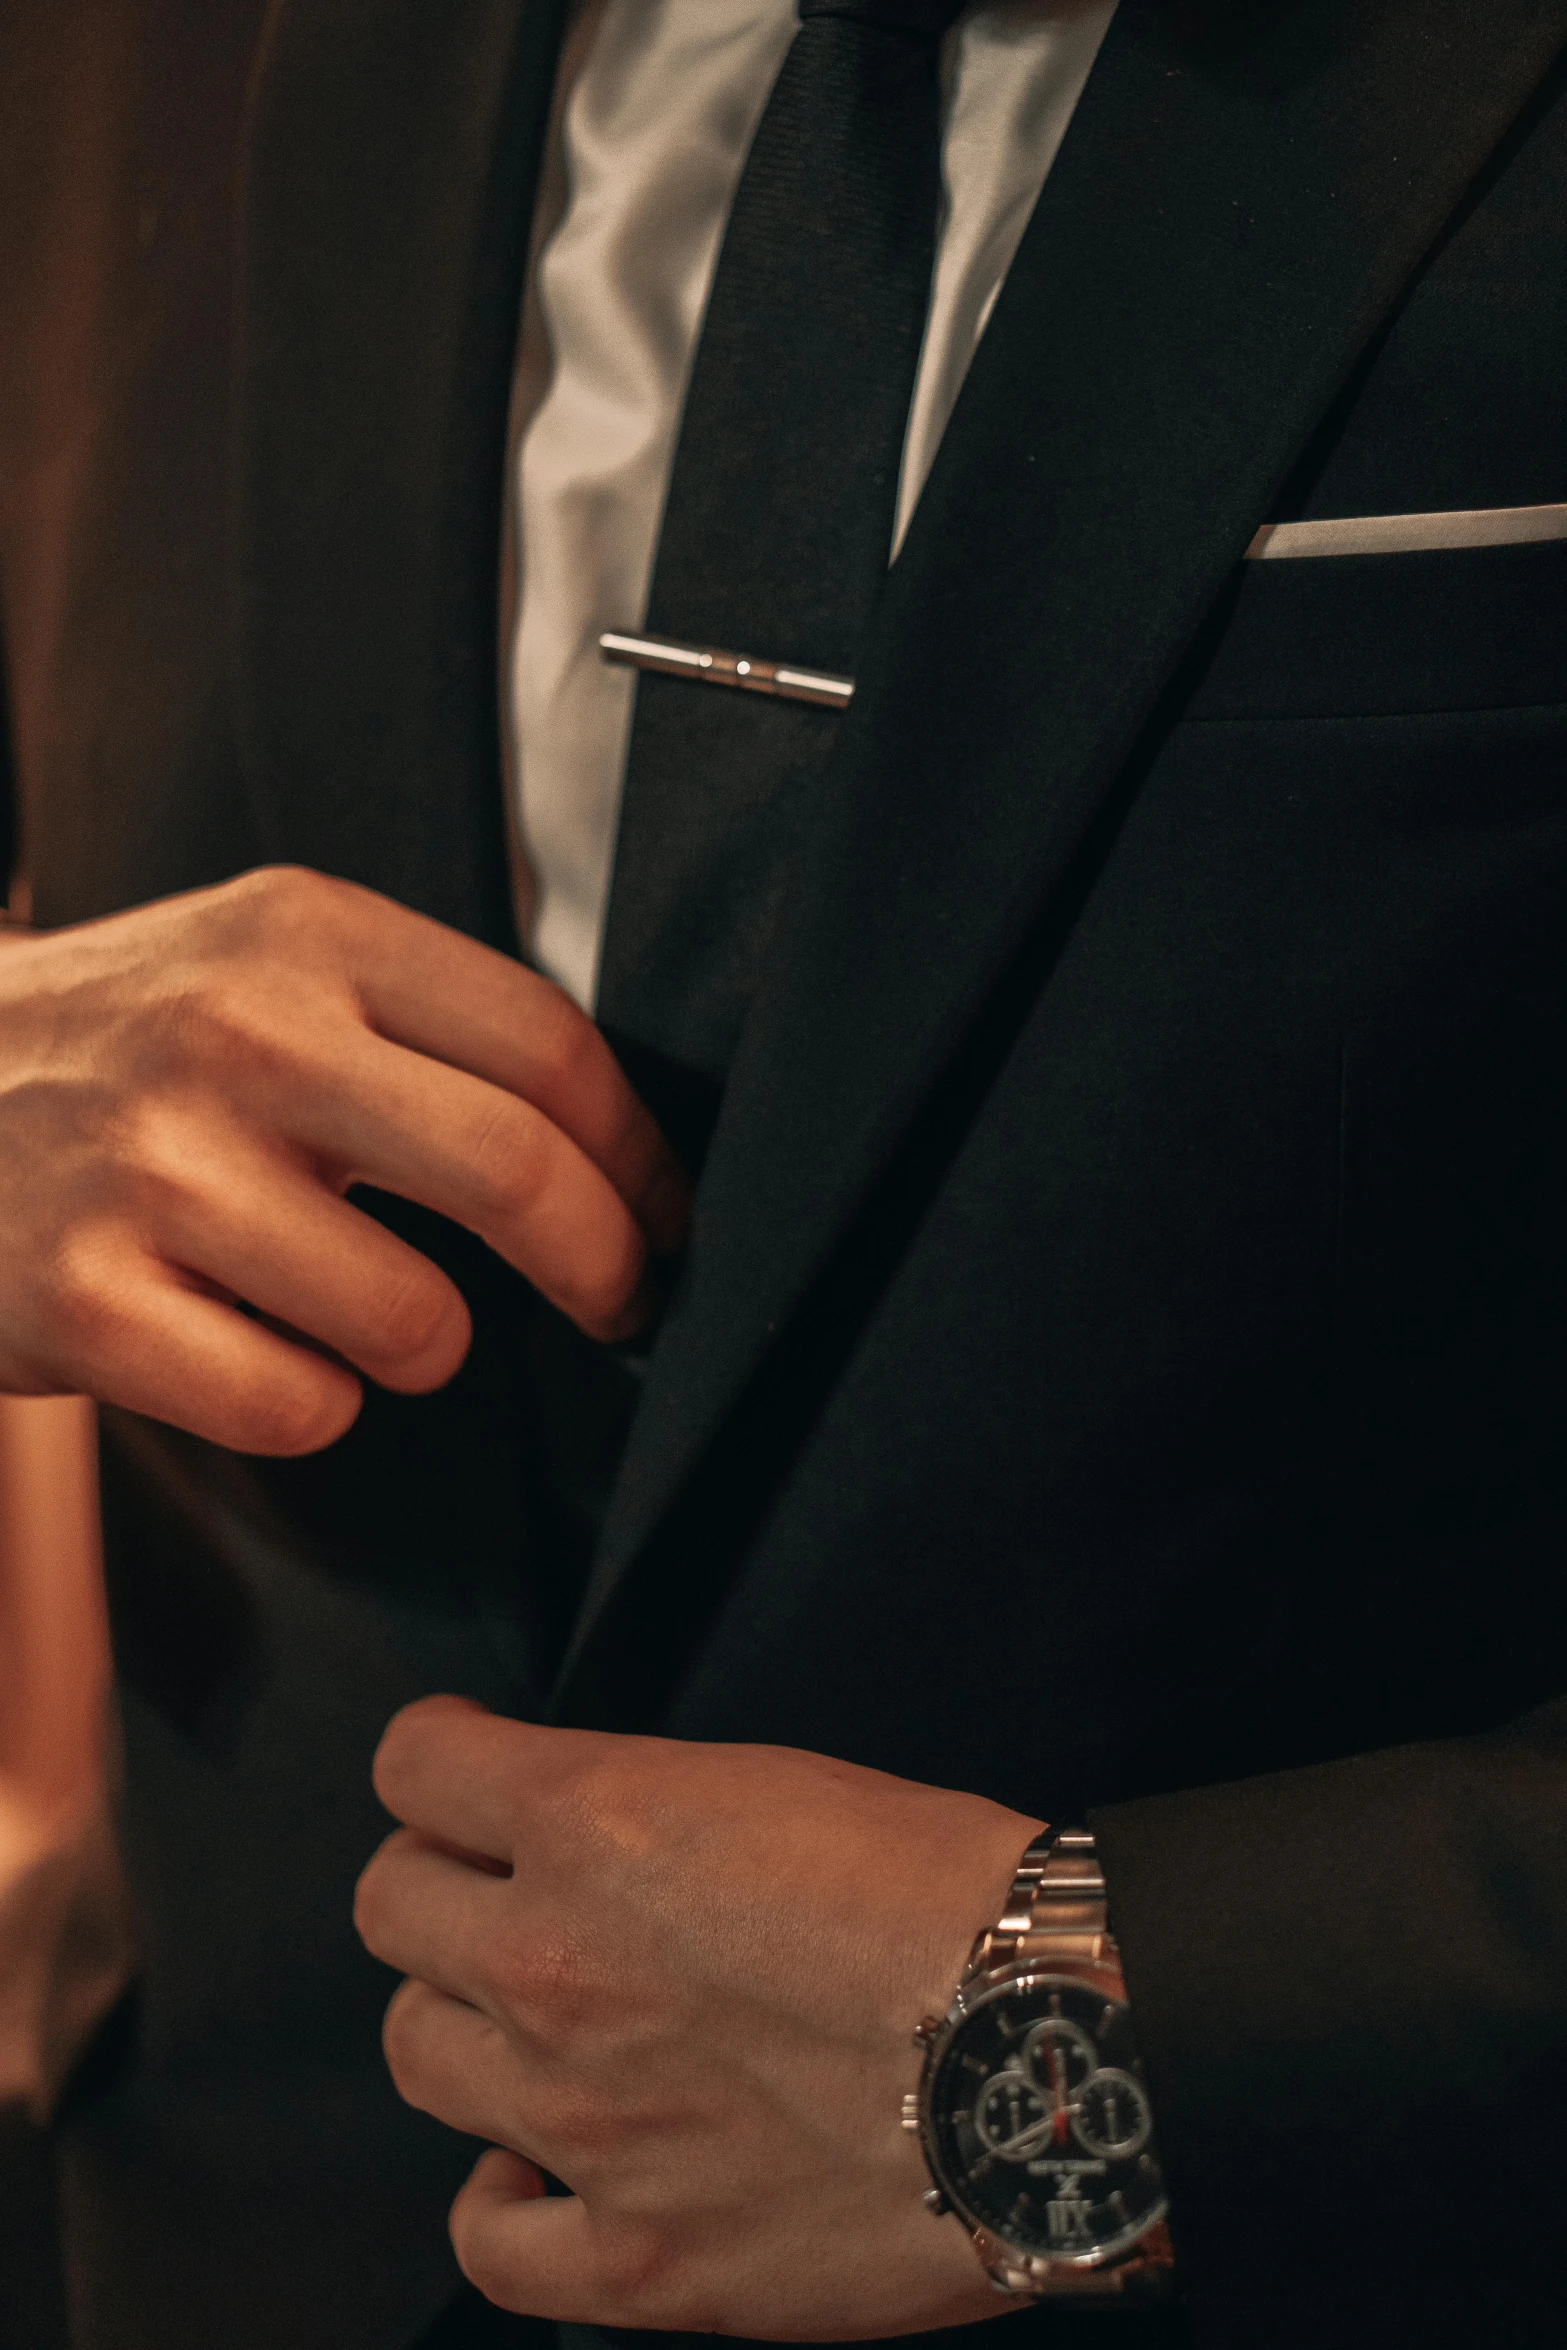 a close up of a person wearing a suit and watch